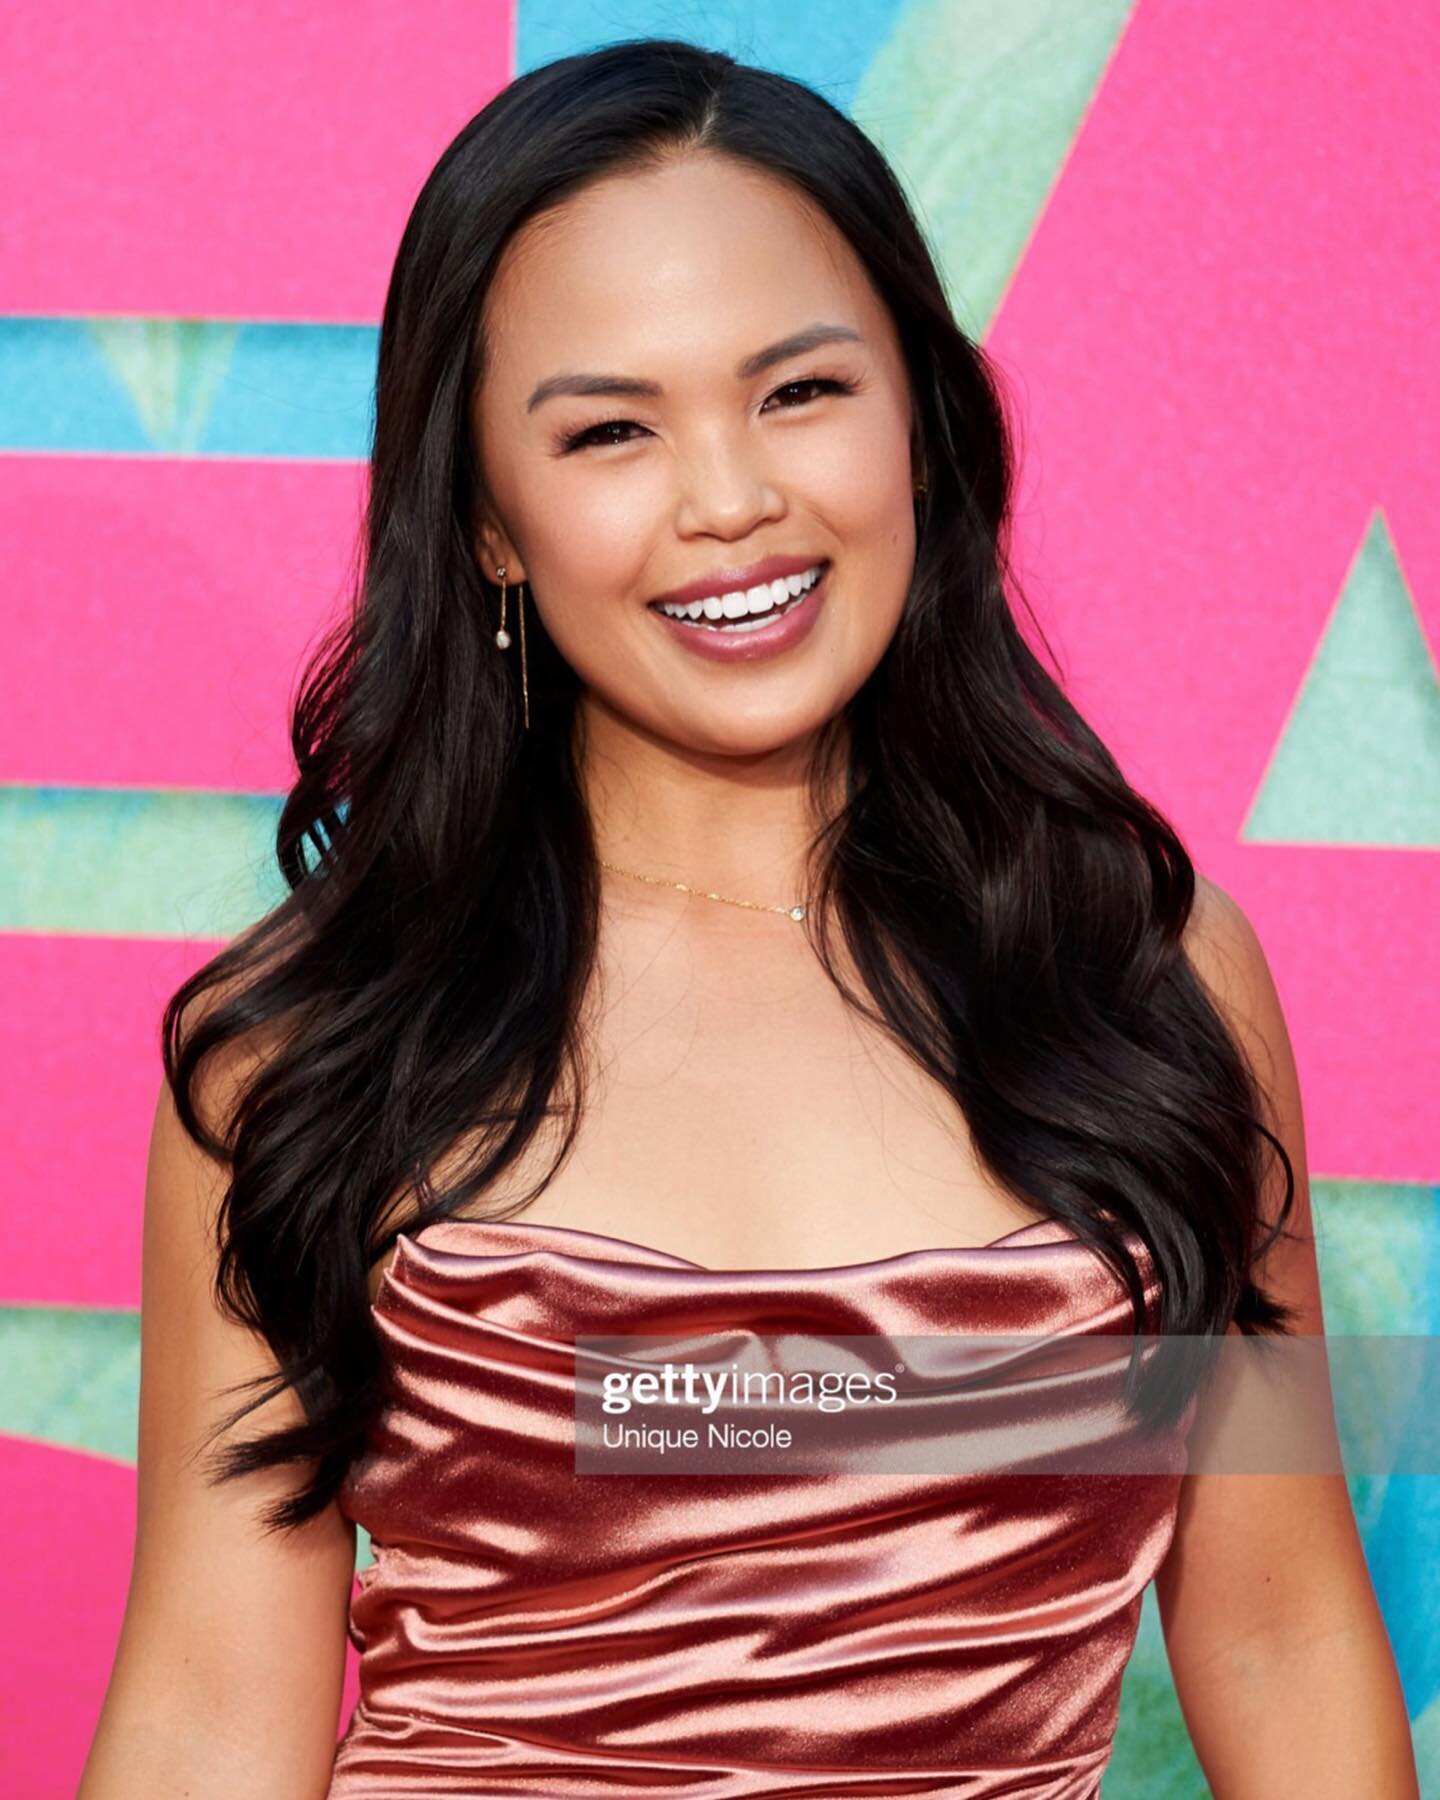 Walking the pink carpet for the Easter Sunday movie premiere last night! I love supporting my Asian fam. 🙌 From a movie with a predominately Asian cast to the Asian woman owned @costante___ jewelry I&rsquo;m wearing. Go get &lsquo;em fam! I&rsquo;m 